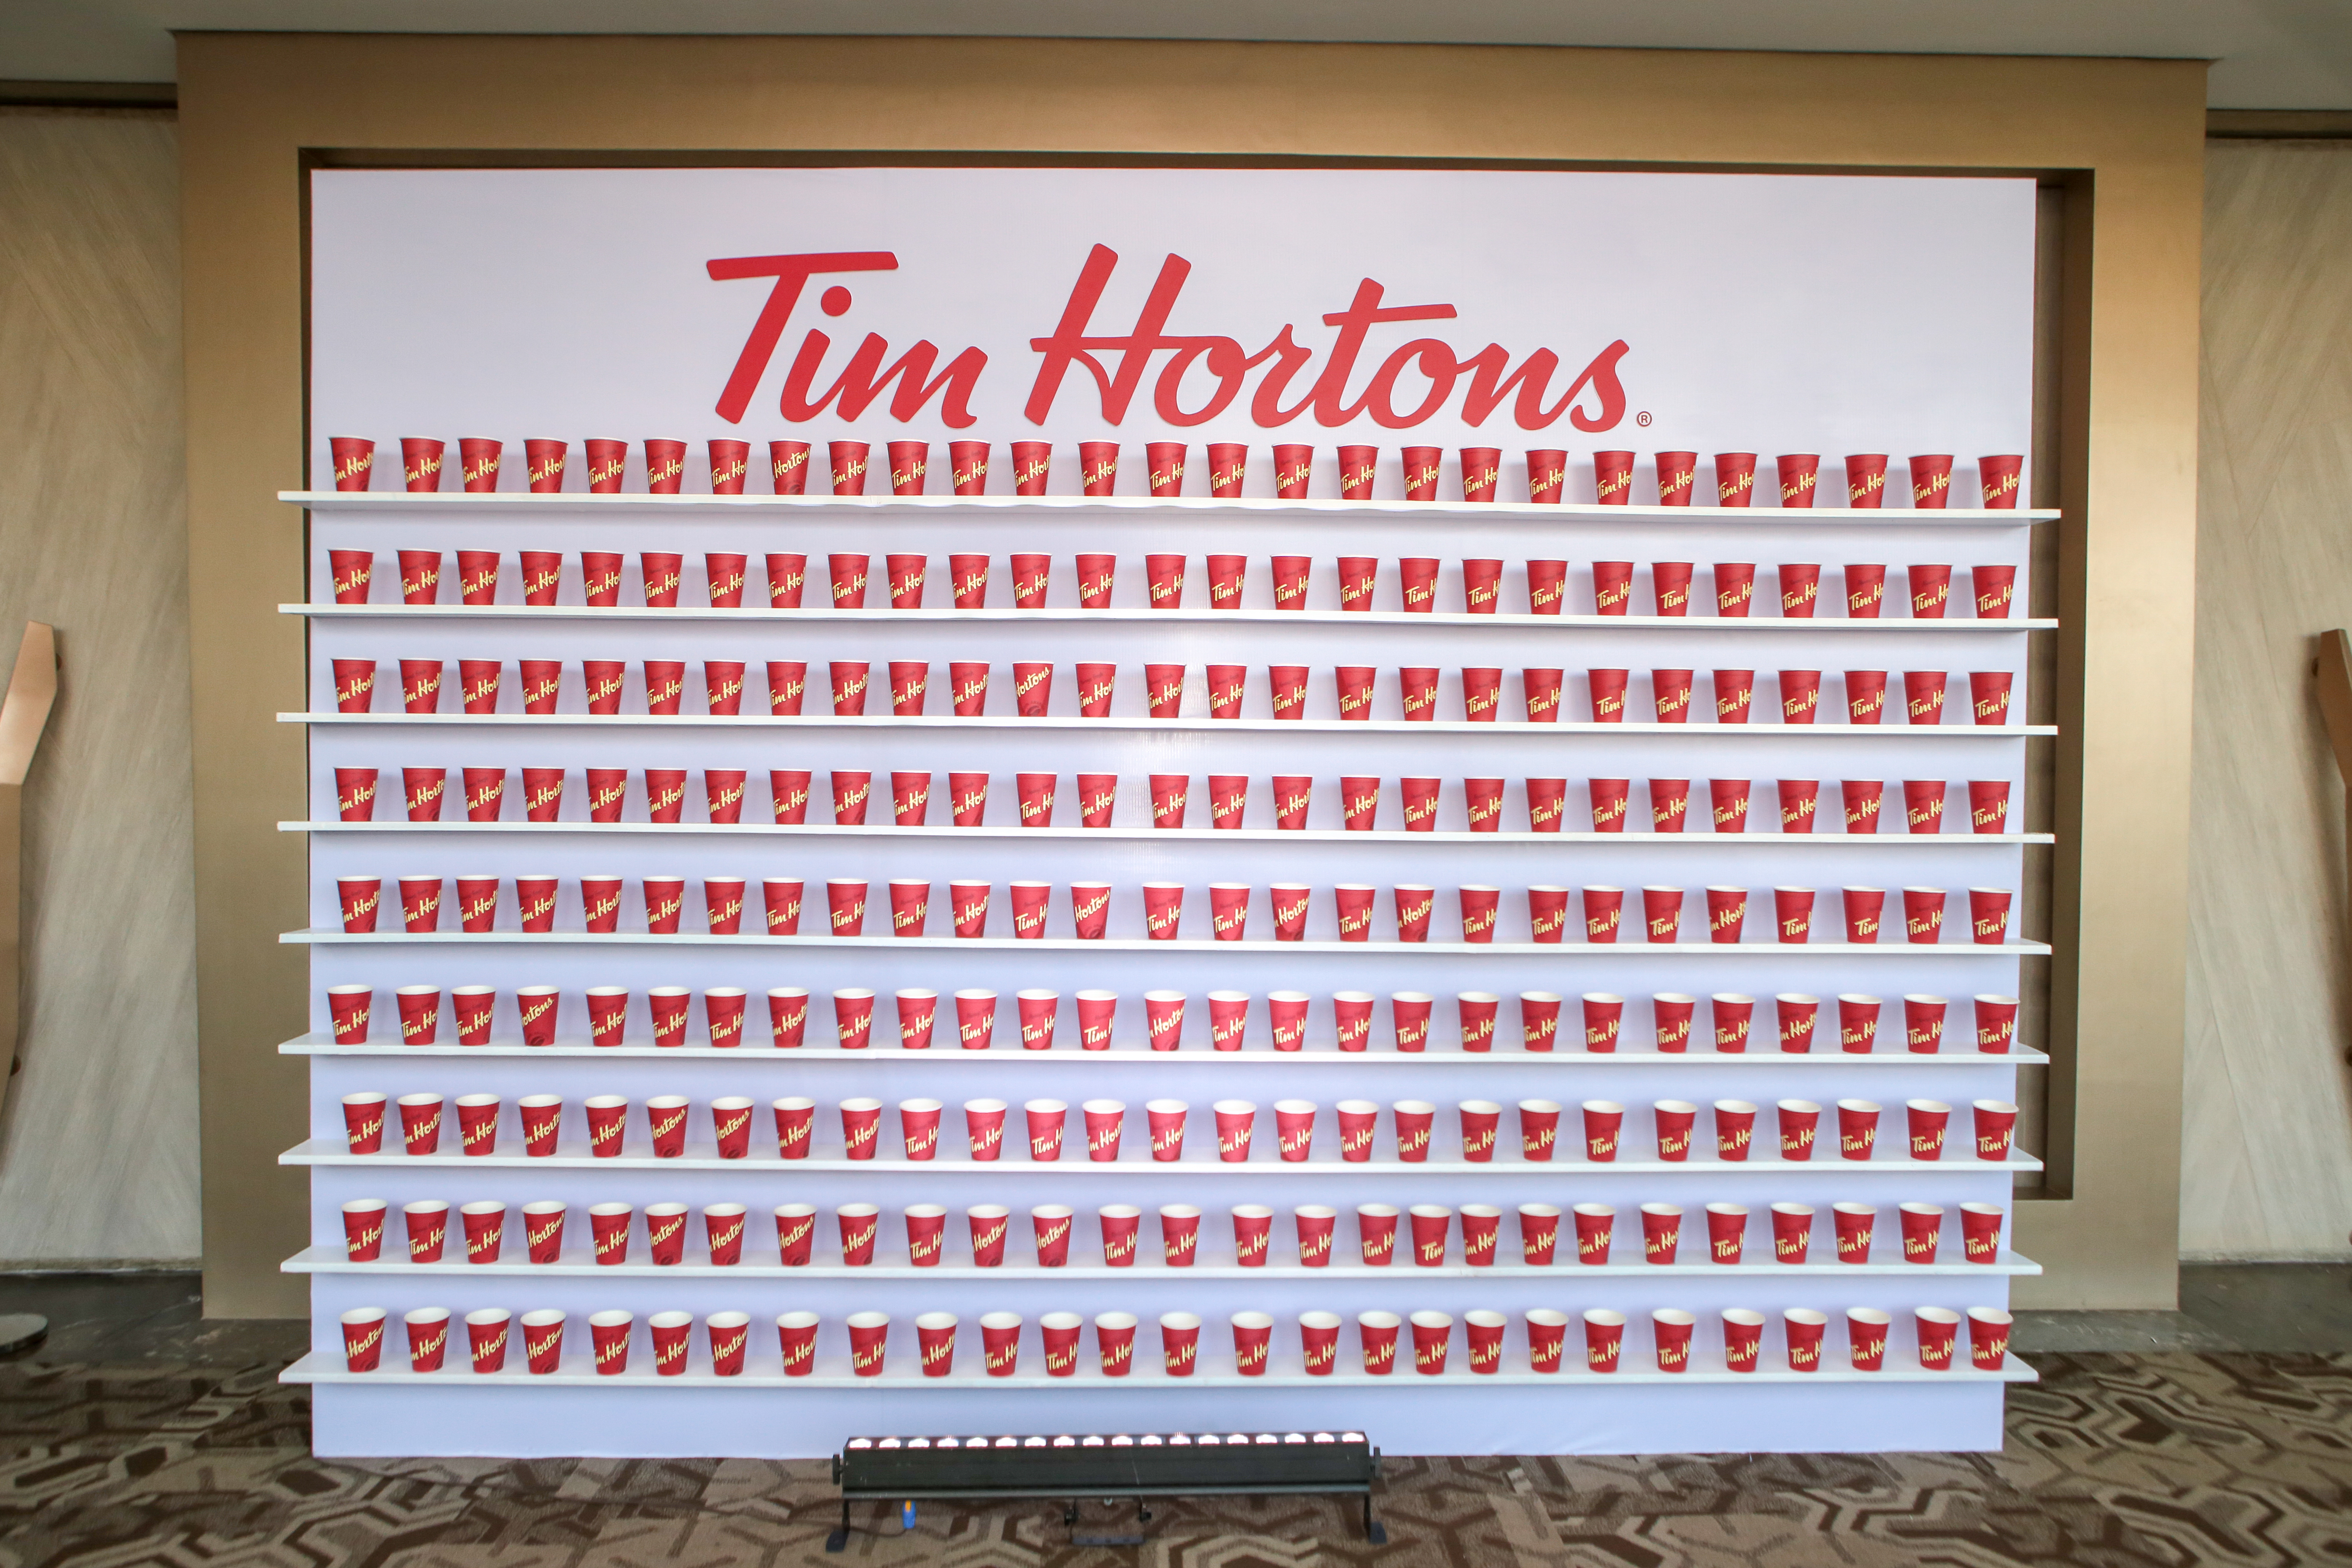 The photo wall composed of Tim Hortons signature cup